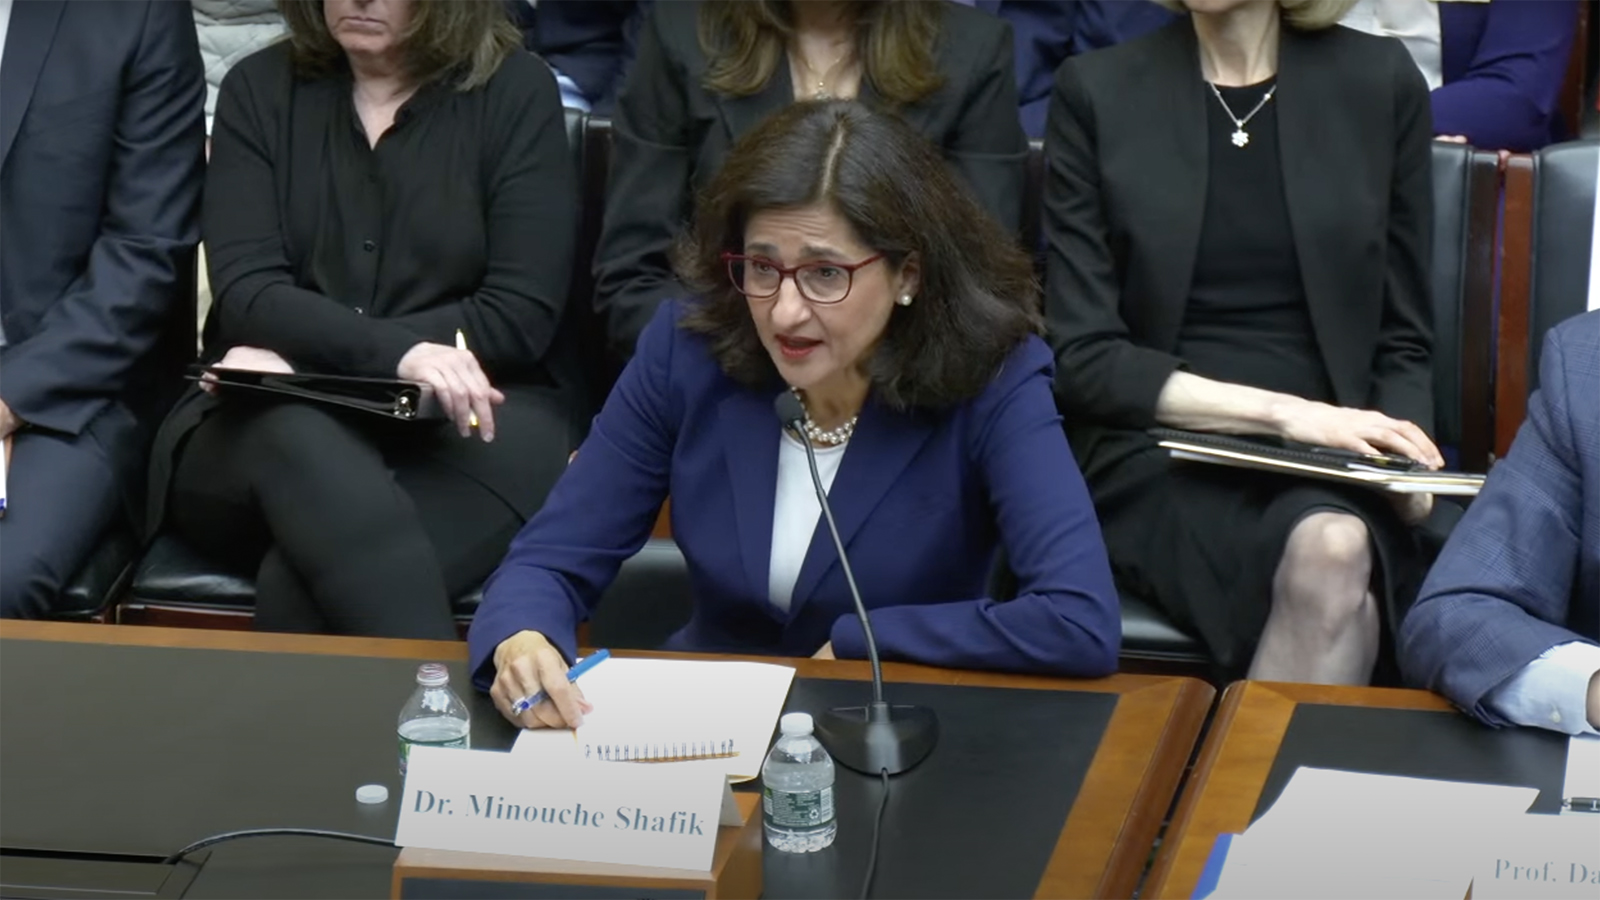 Columbia University President Minouche Shafik answers a question from Rep. Tim Walberg during her testifying at the House committee hearing today.